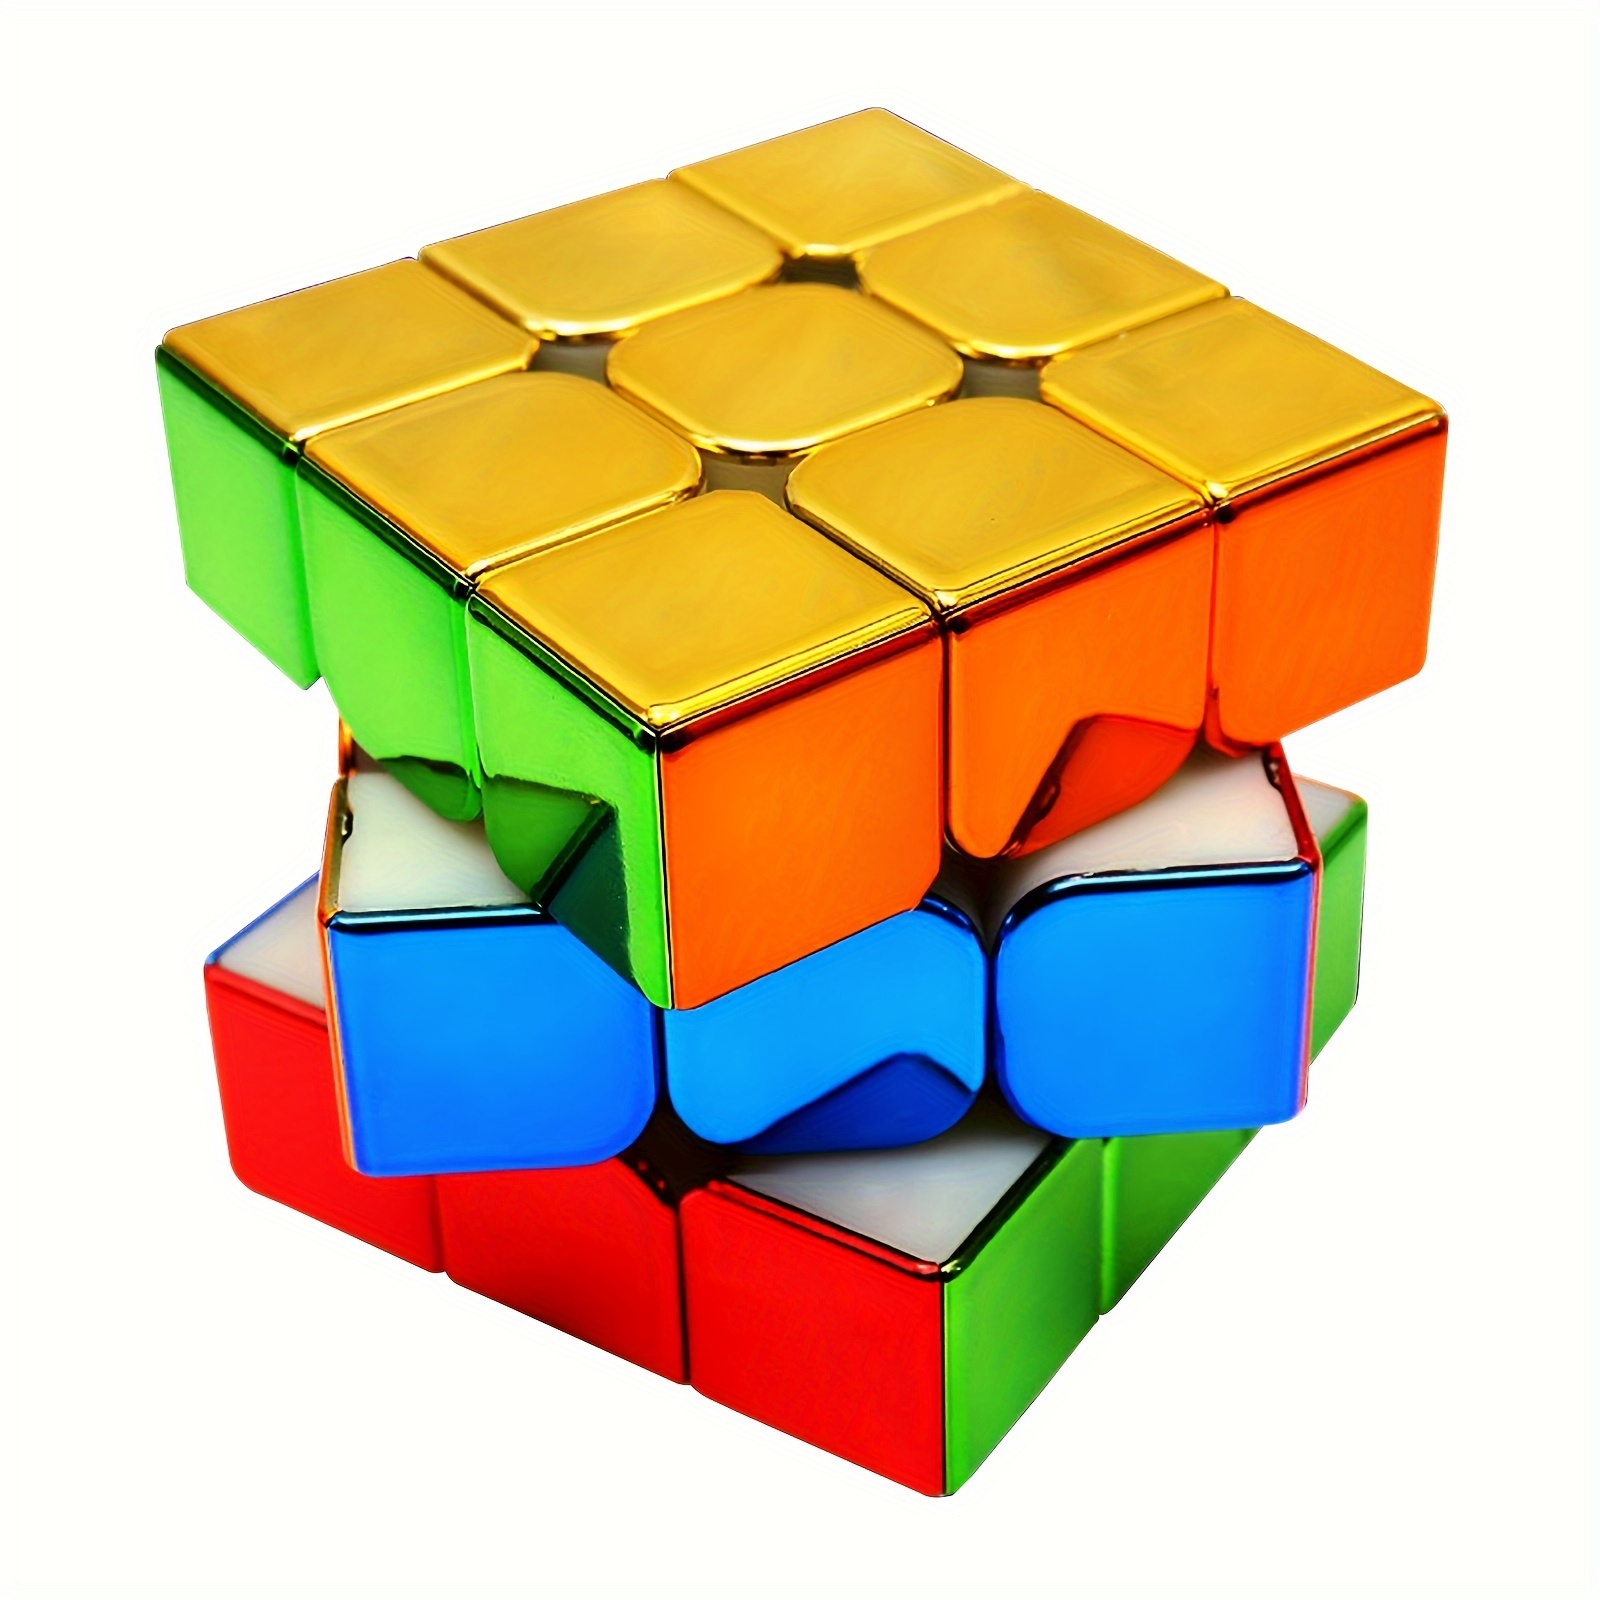 Mirror SQ-2 3D Printed Puzzle Cubo Magico Educational Toy Gift Idea